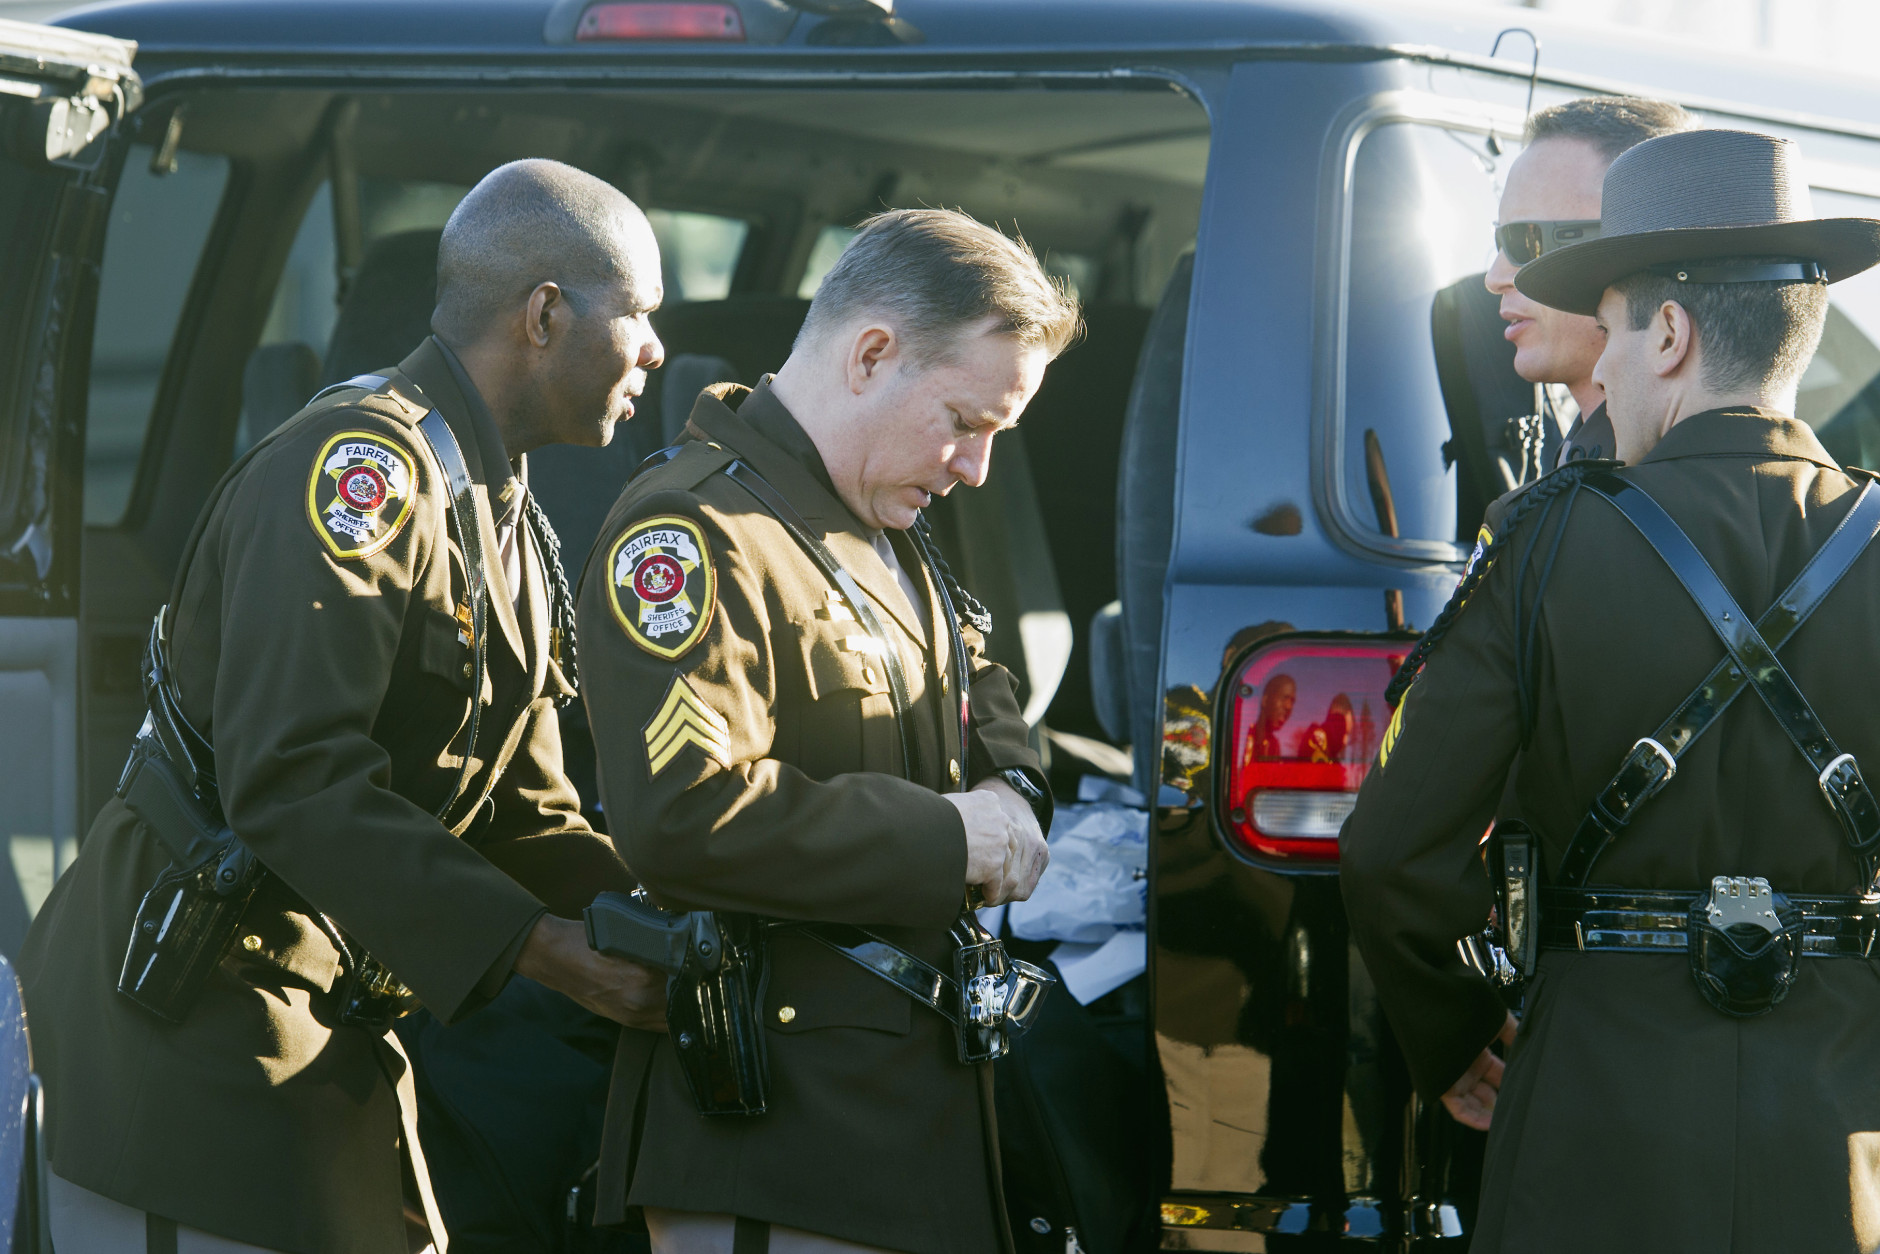 Members of the Fairfax County, Va. Sheriff's Department assist each other in dressing for the funeral of Prince William County, Va. Police Officer Ashley Guindon, Tuesday, March 1, 2016, at the Hylton Memorial Chapel in Woodbrige, Va. Guindon was shot and killed, on her first day of work for Prince William County, when she responded to a domestic dispute in Woodbridge on Saturday. Feb. 27, 2016.  (AP Photo/Cliff Owen)